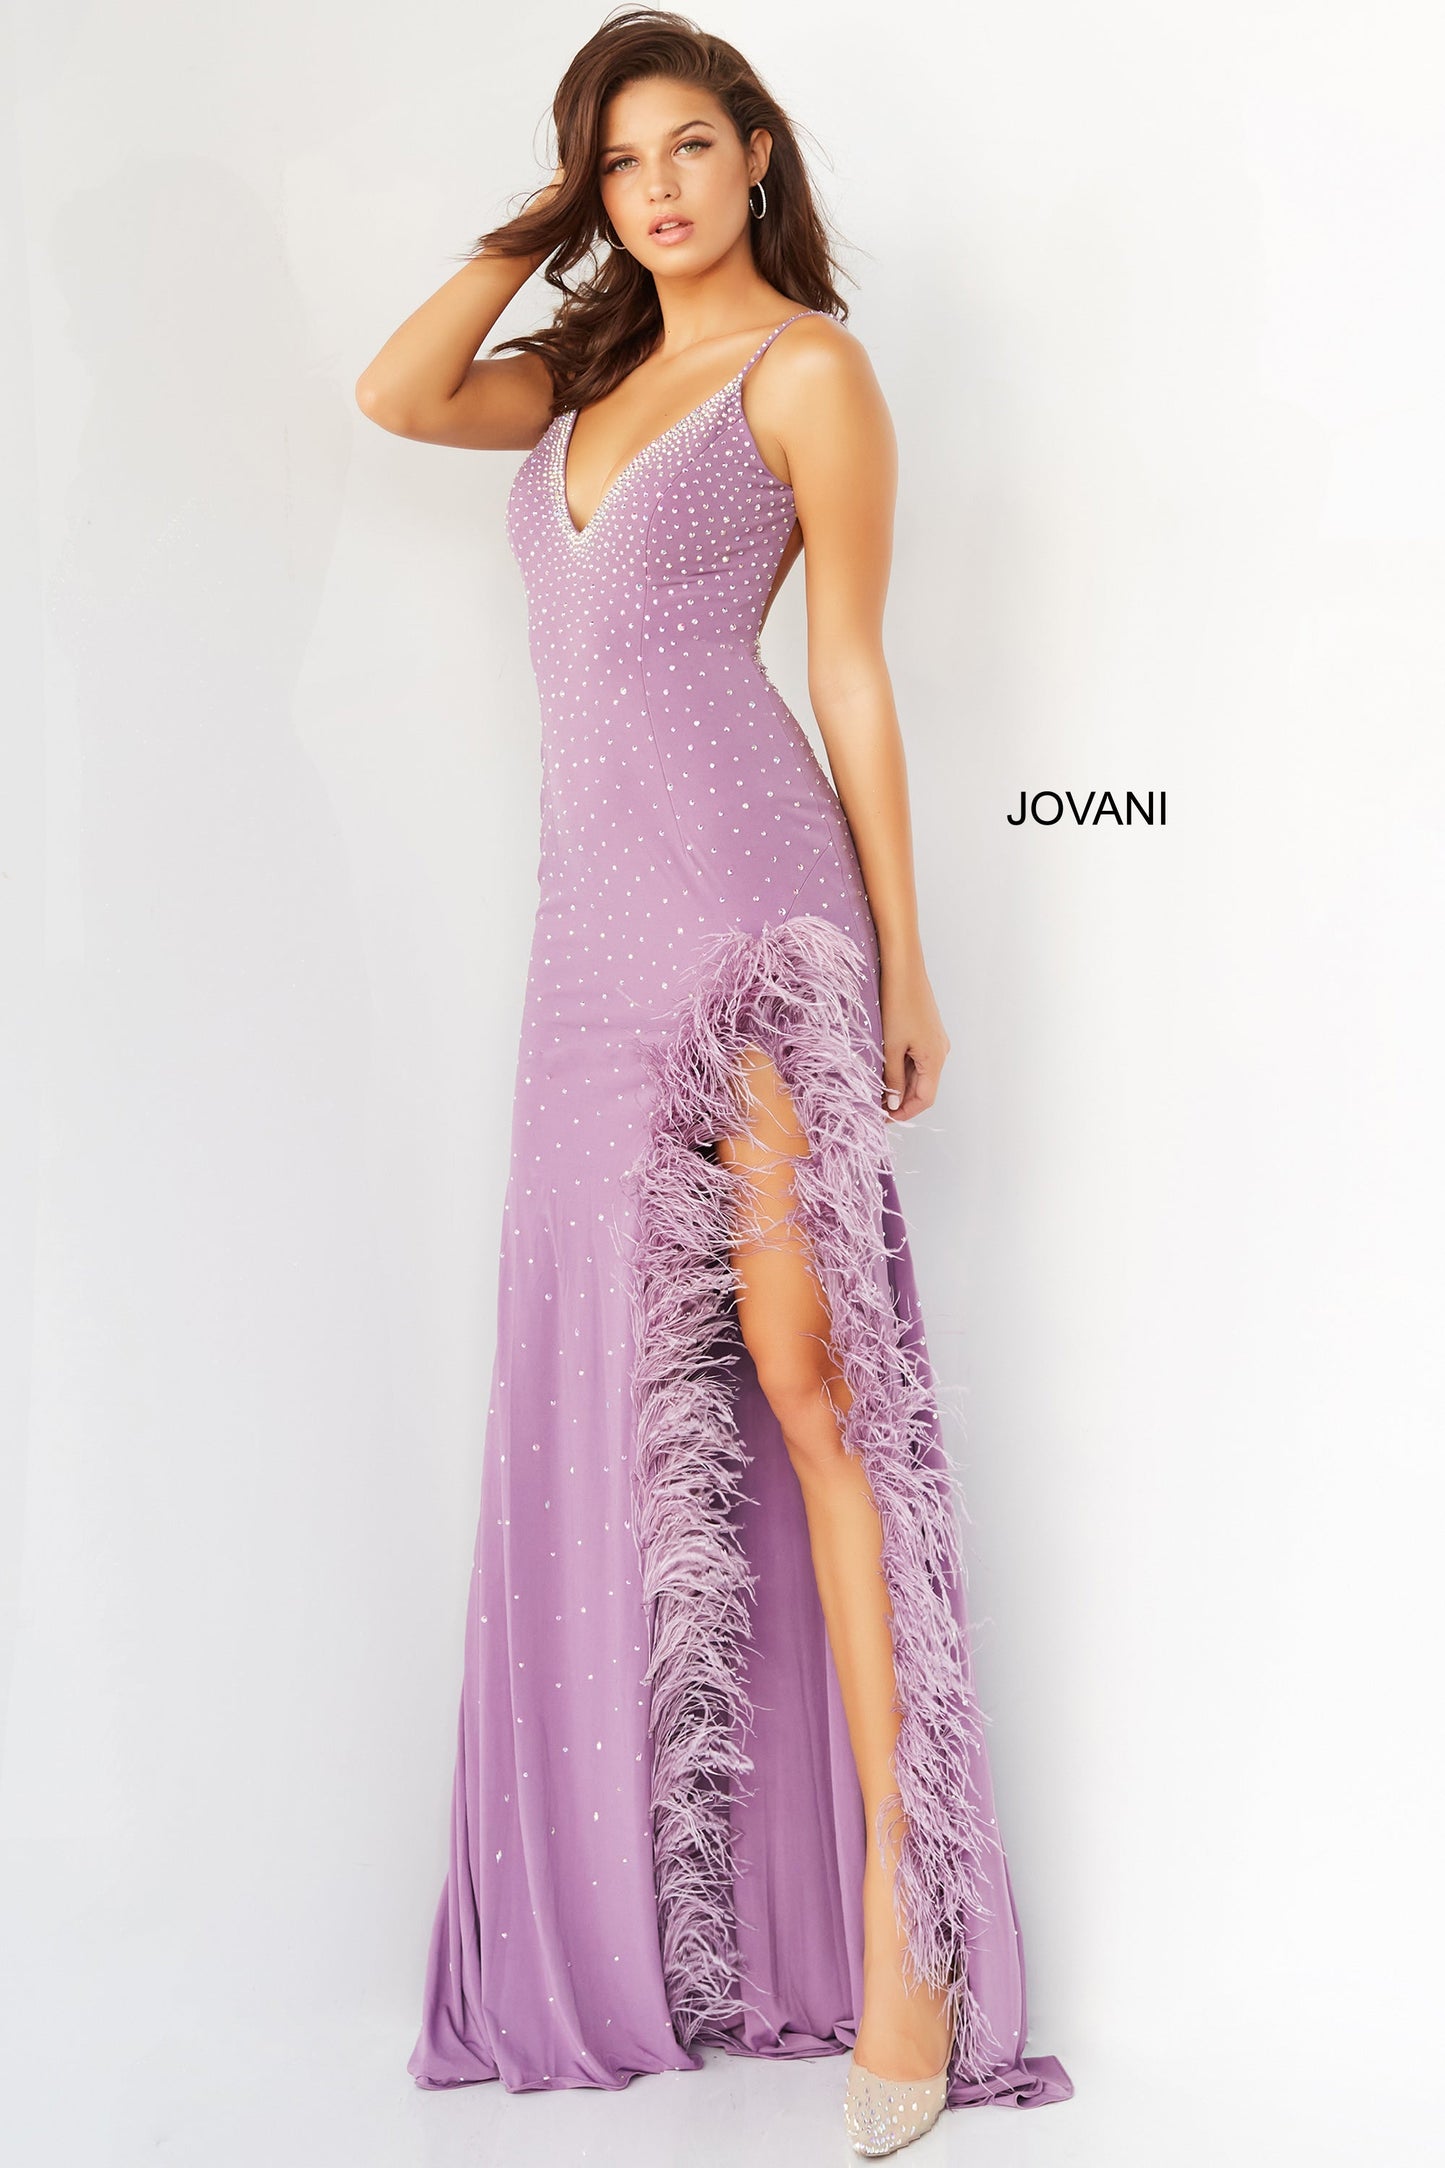 Jovani 08283  Prom, Pageant and Formal Evening Wear Dress.  This extravagant evening gown has a v neckline and low back.  It is fitted and beaded with a feather trimmed slit. Make a statement in this stand out prom dress. Lilac front